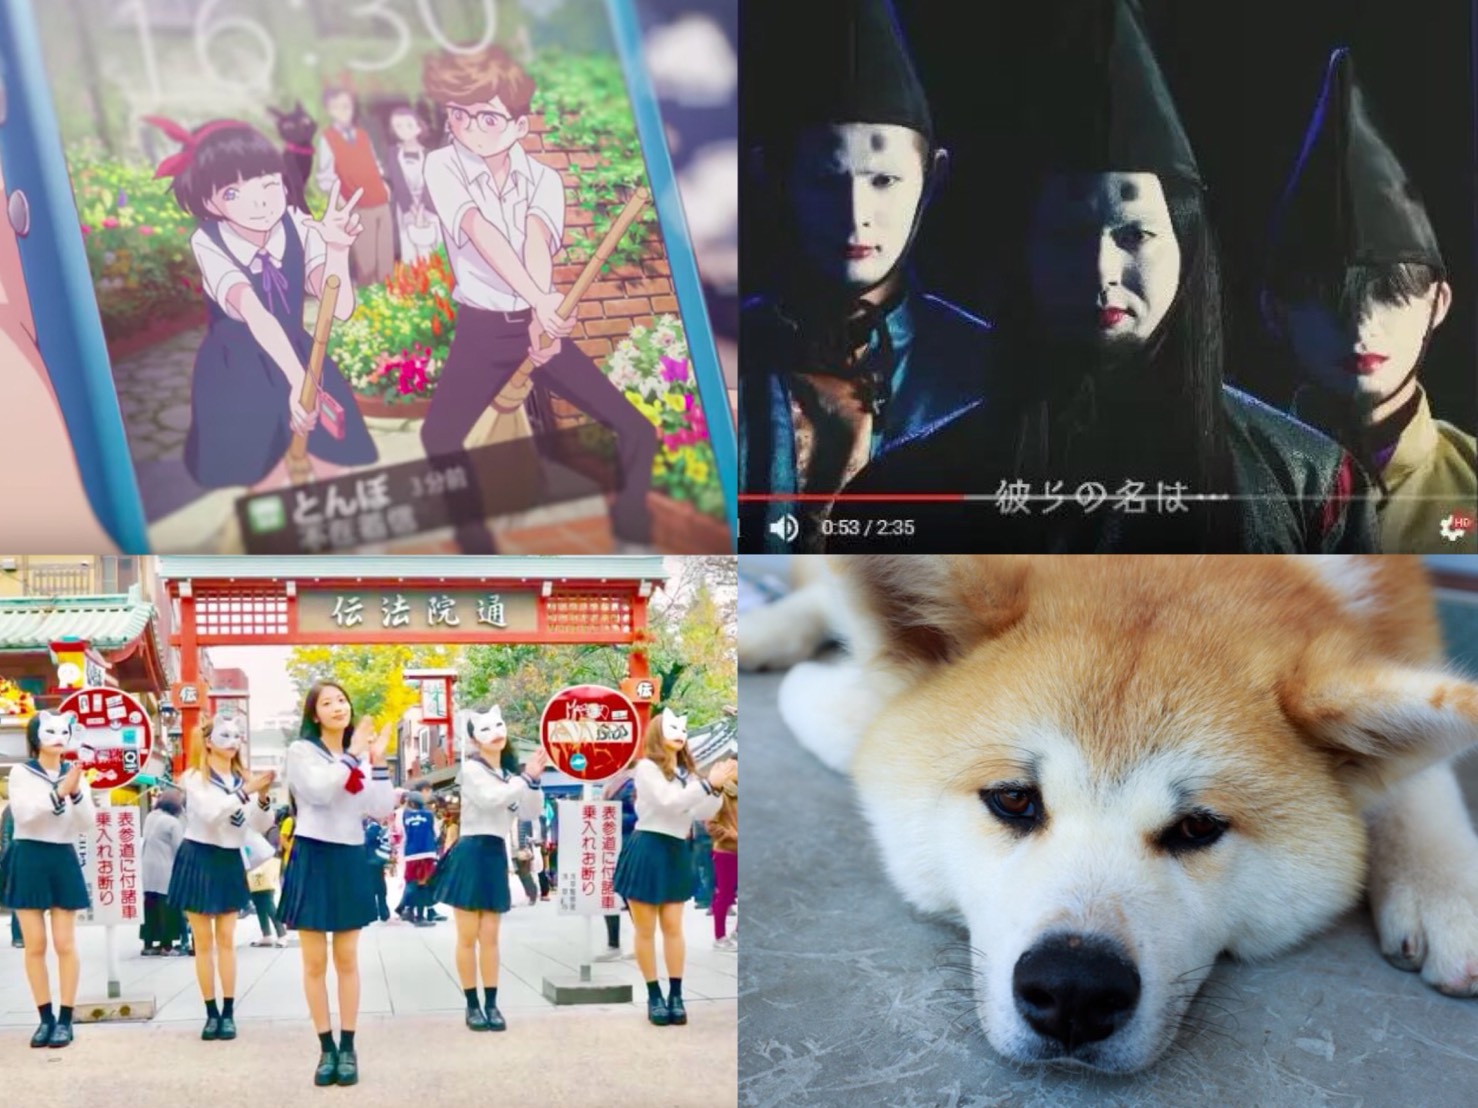 Popular Online Videos Worldwide from Japan – Over One Hundred Million Views!